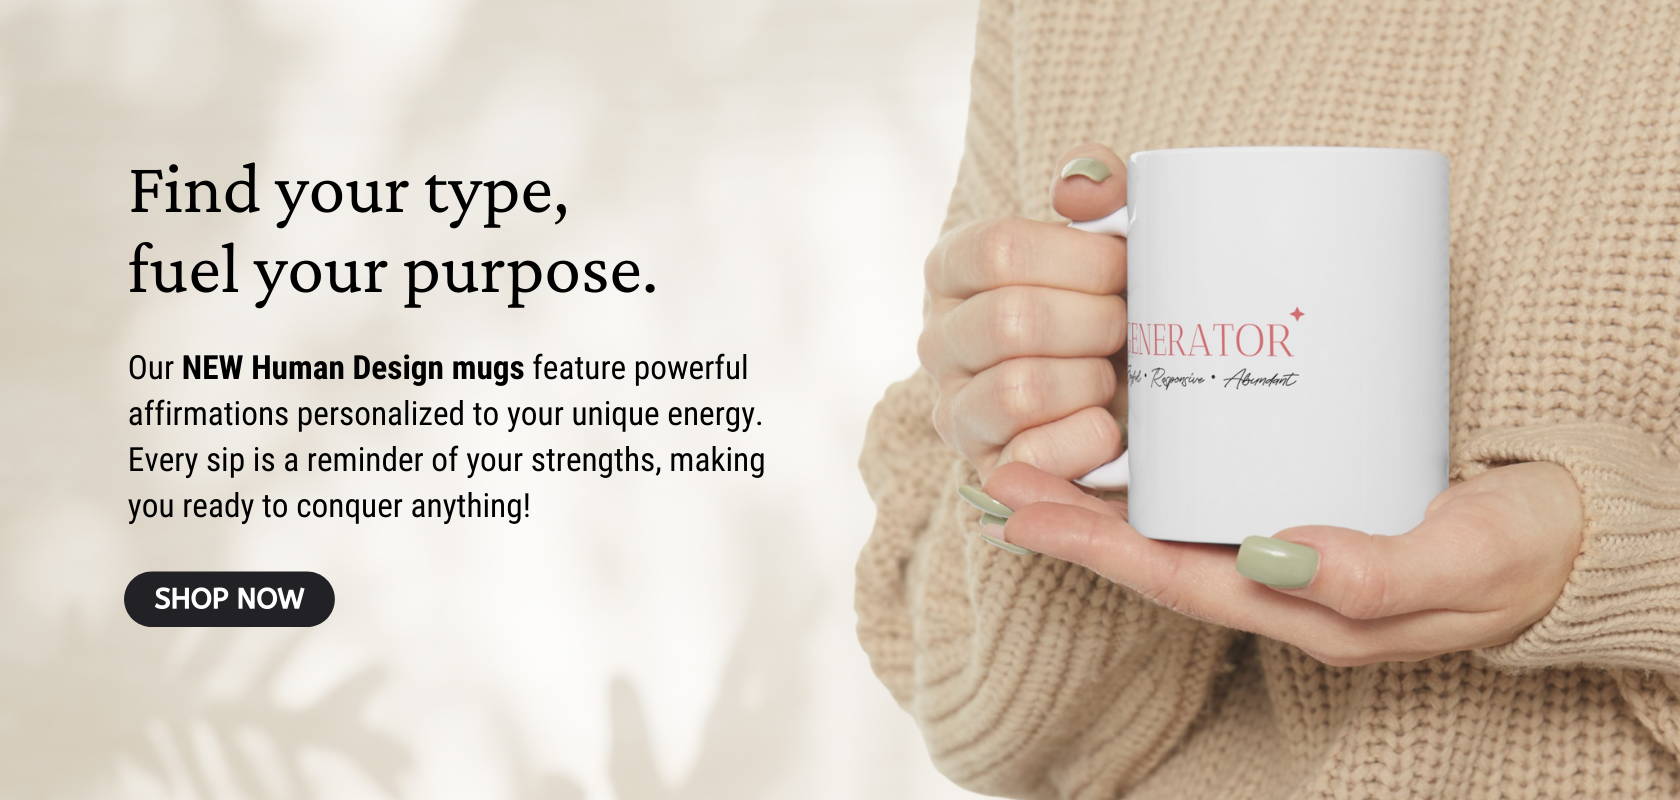 New Human Design mug with affirmation based on energy type now available! 